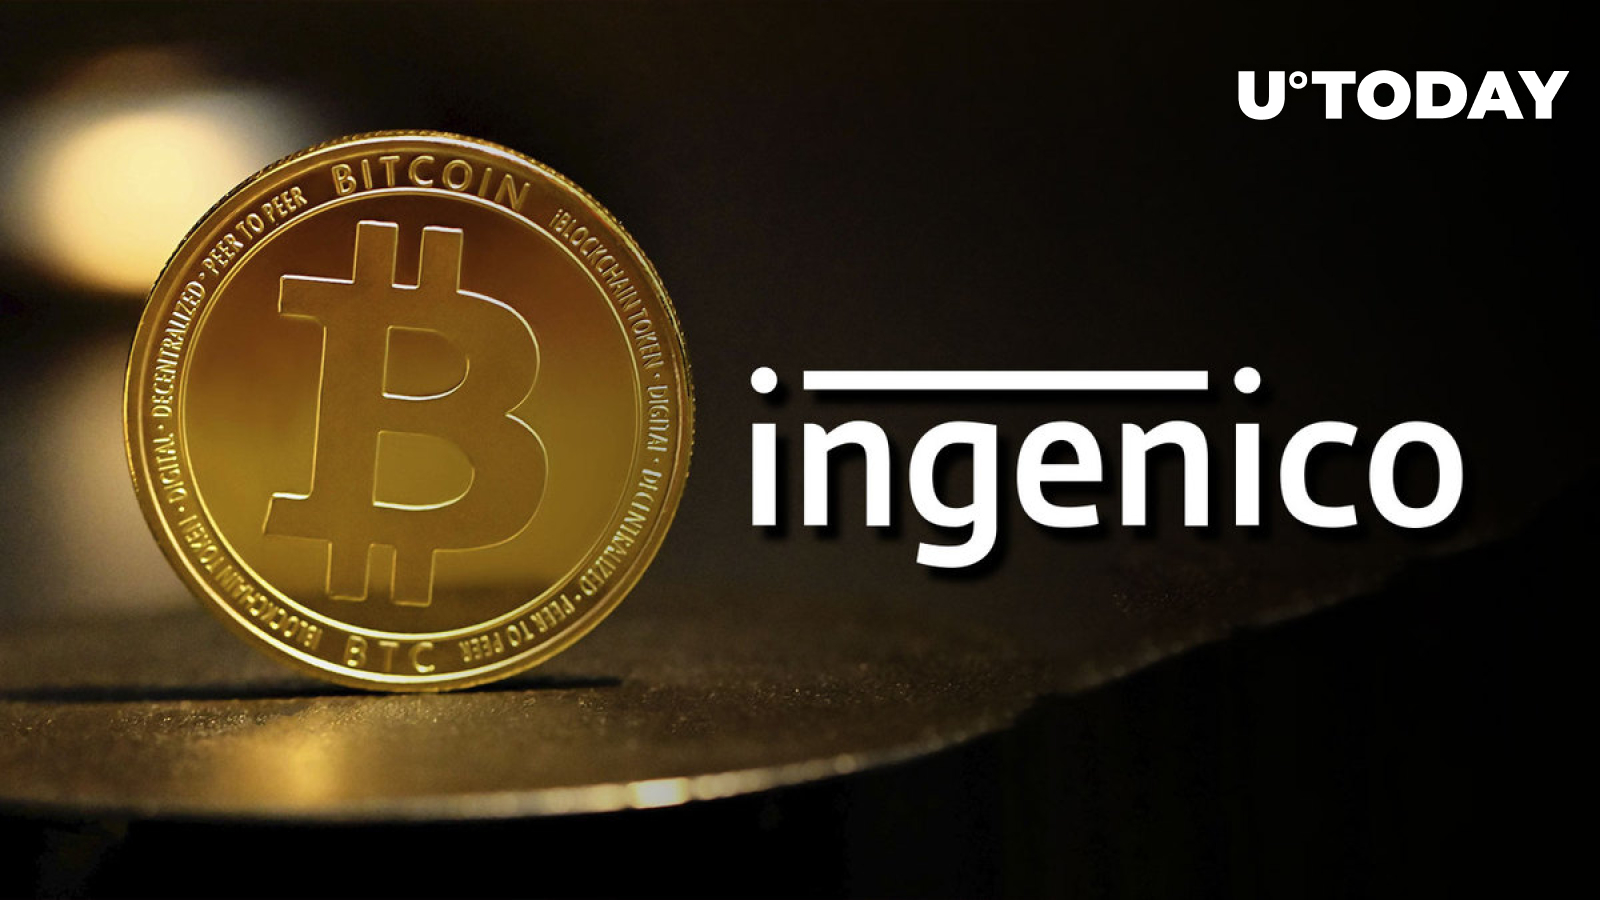 Global Payment Giant Ingenico Now Accepting Bitcoin: Details